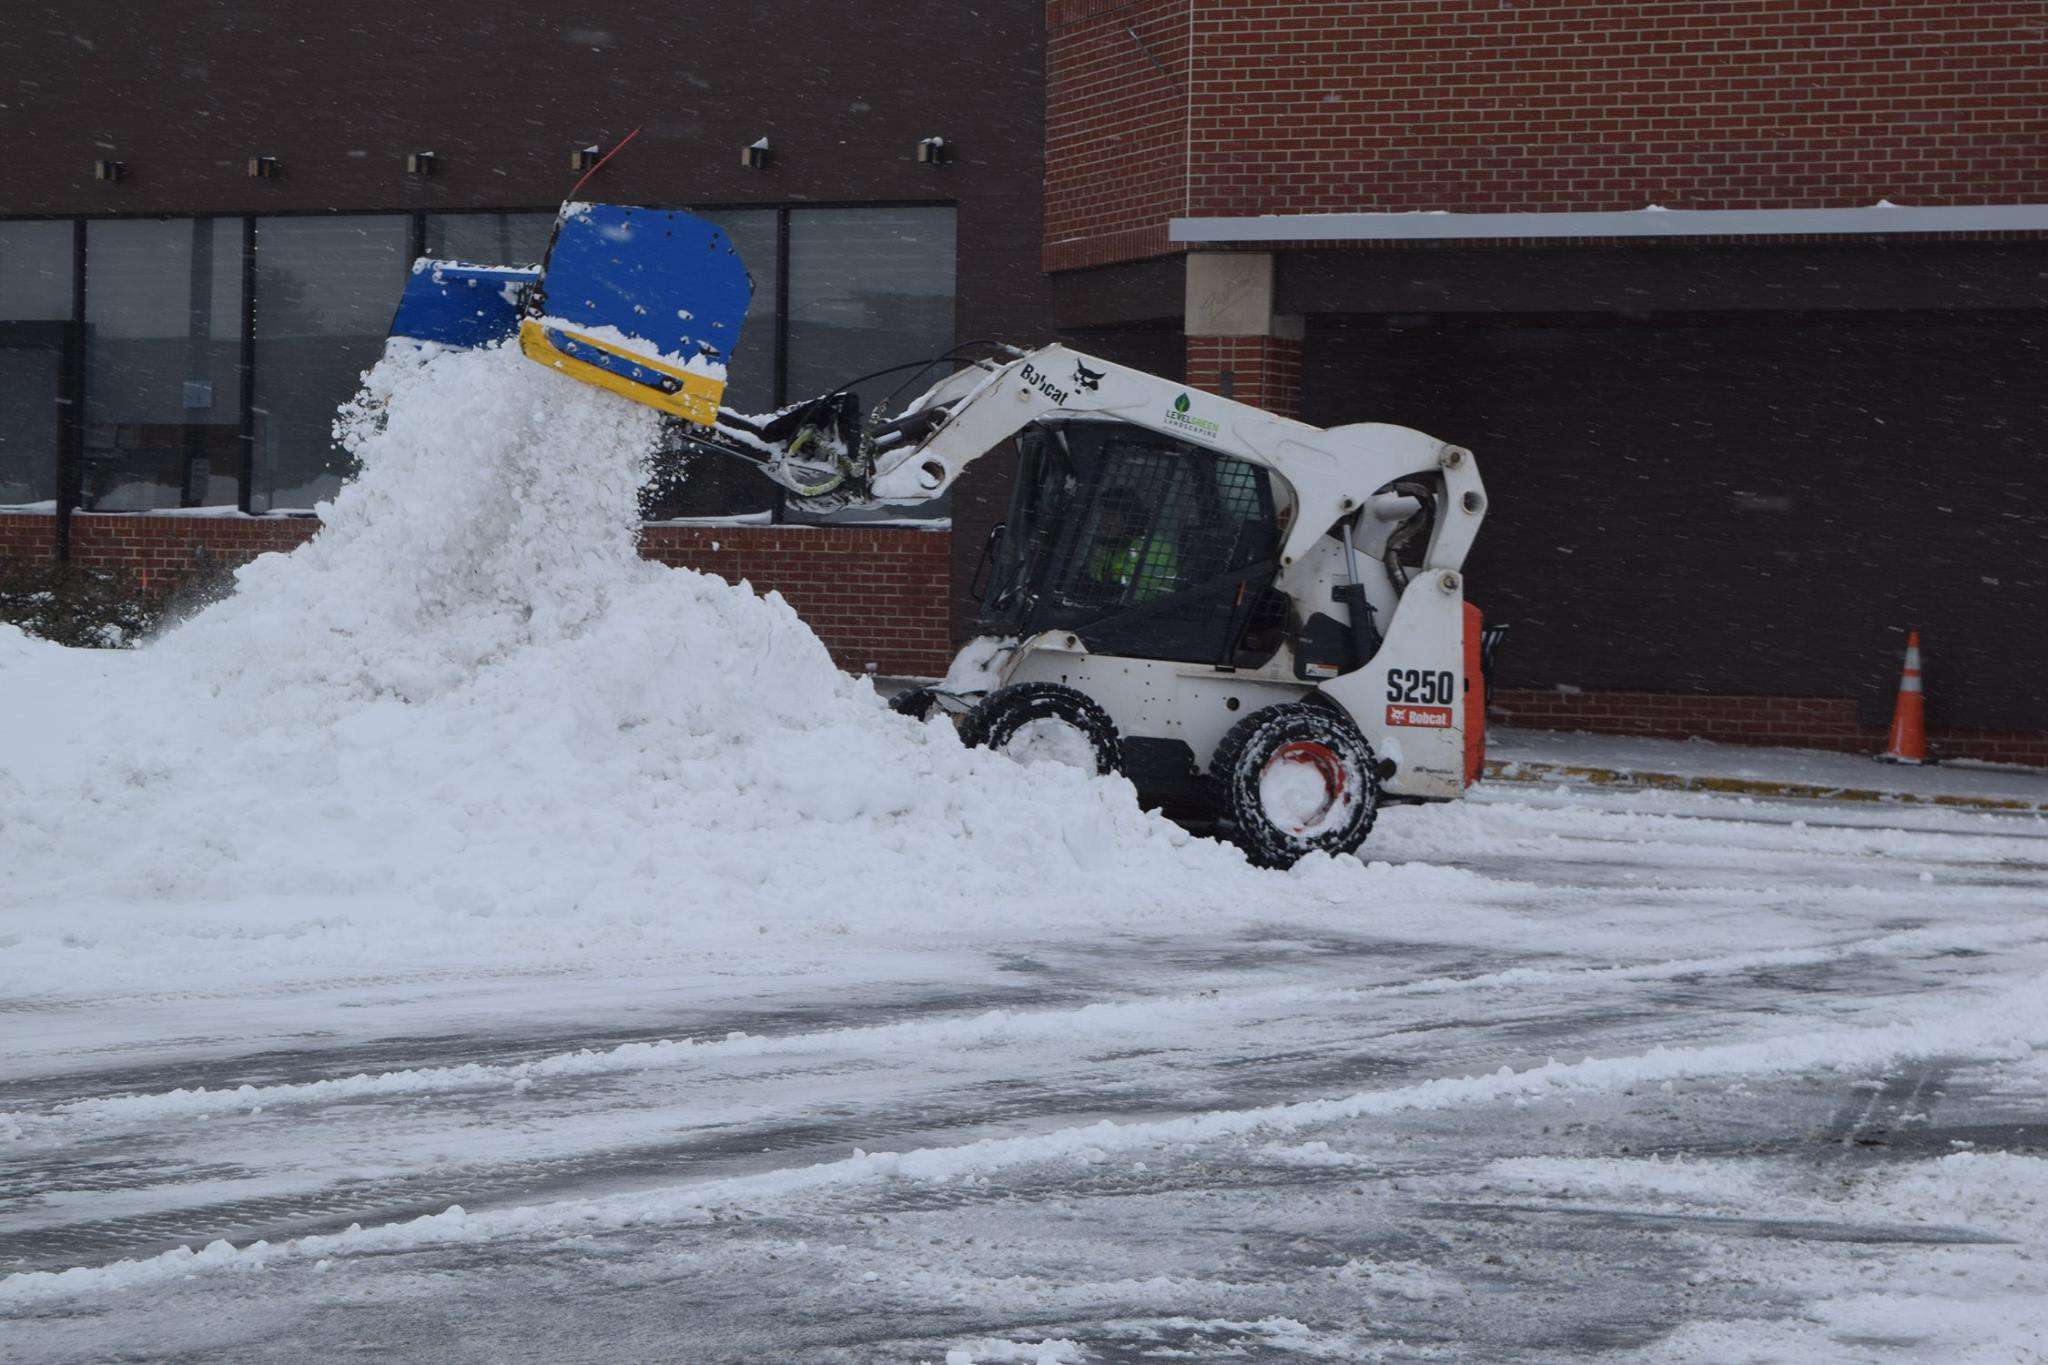 Crews moving snow with a skidsteer